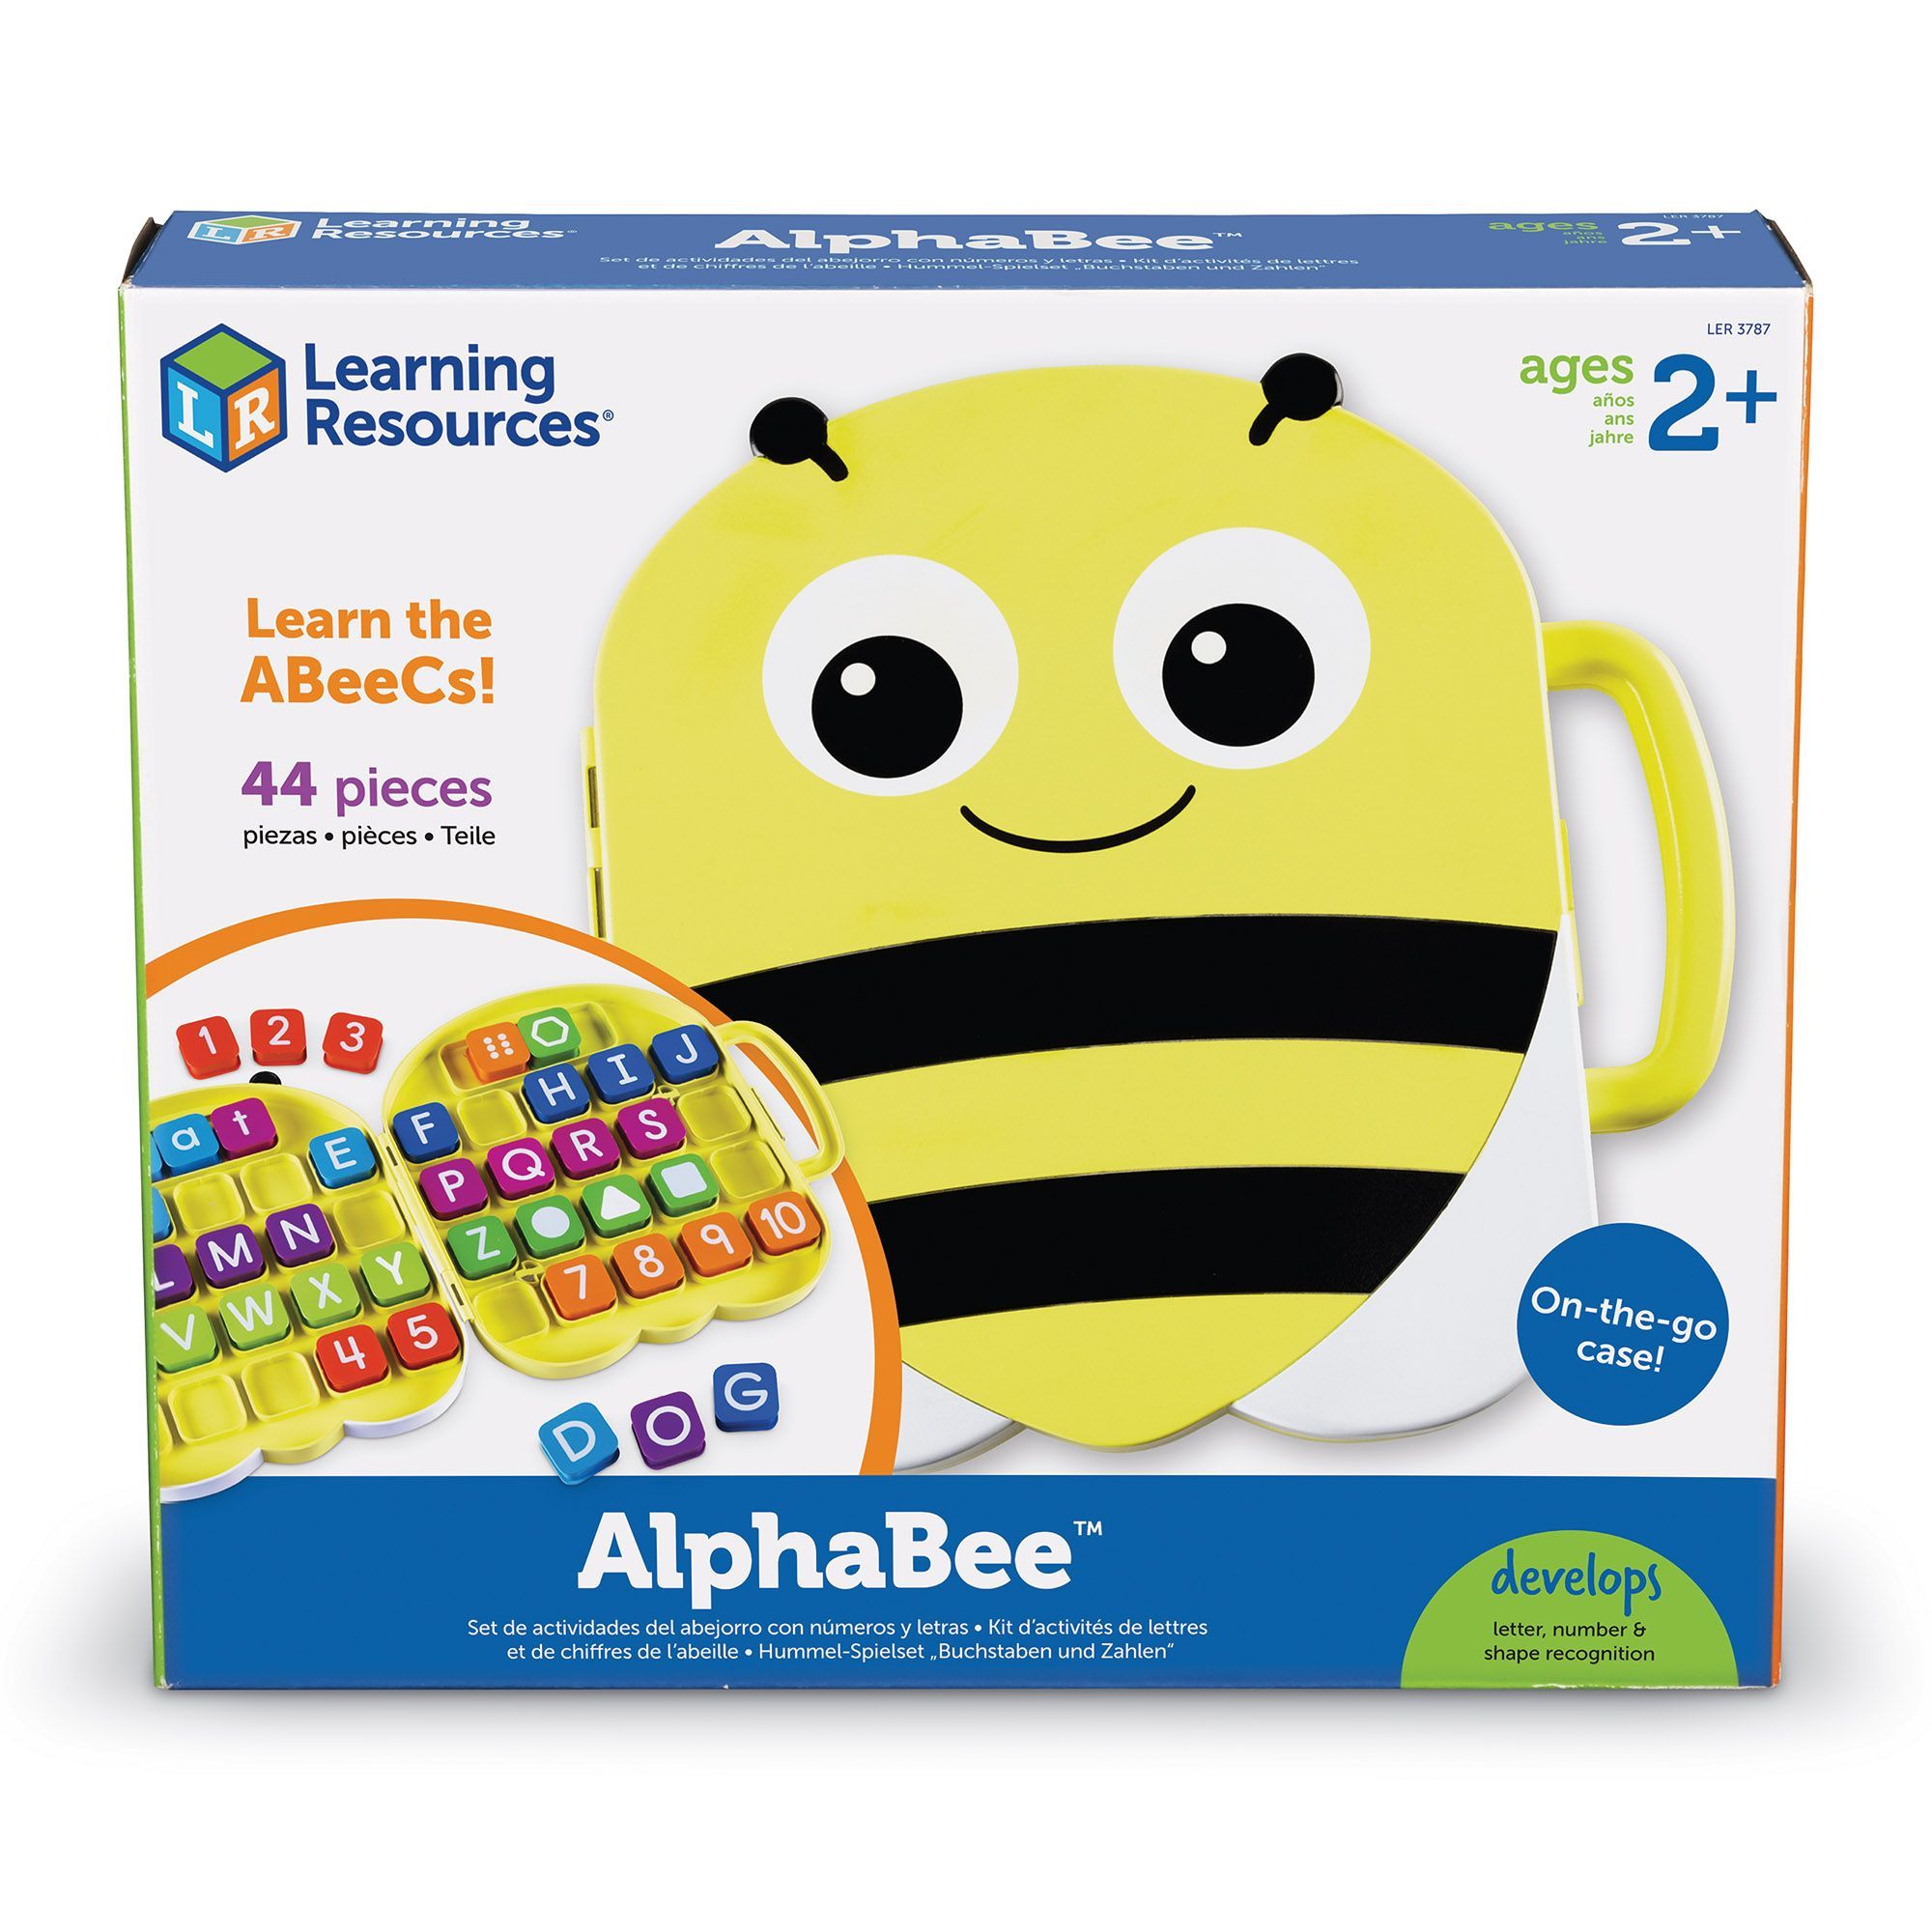 Aphabee learning toy - Learning resources toys - shop educational toys for 2 year old